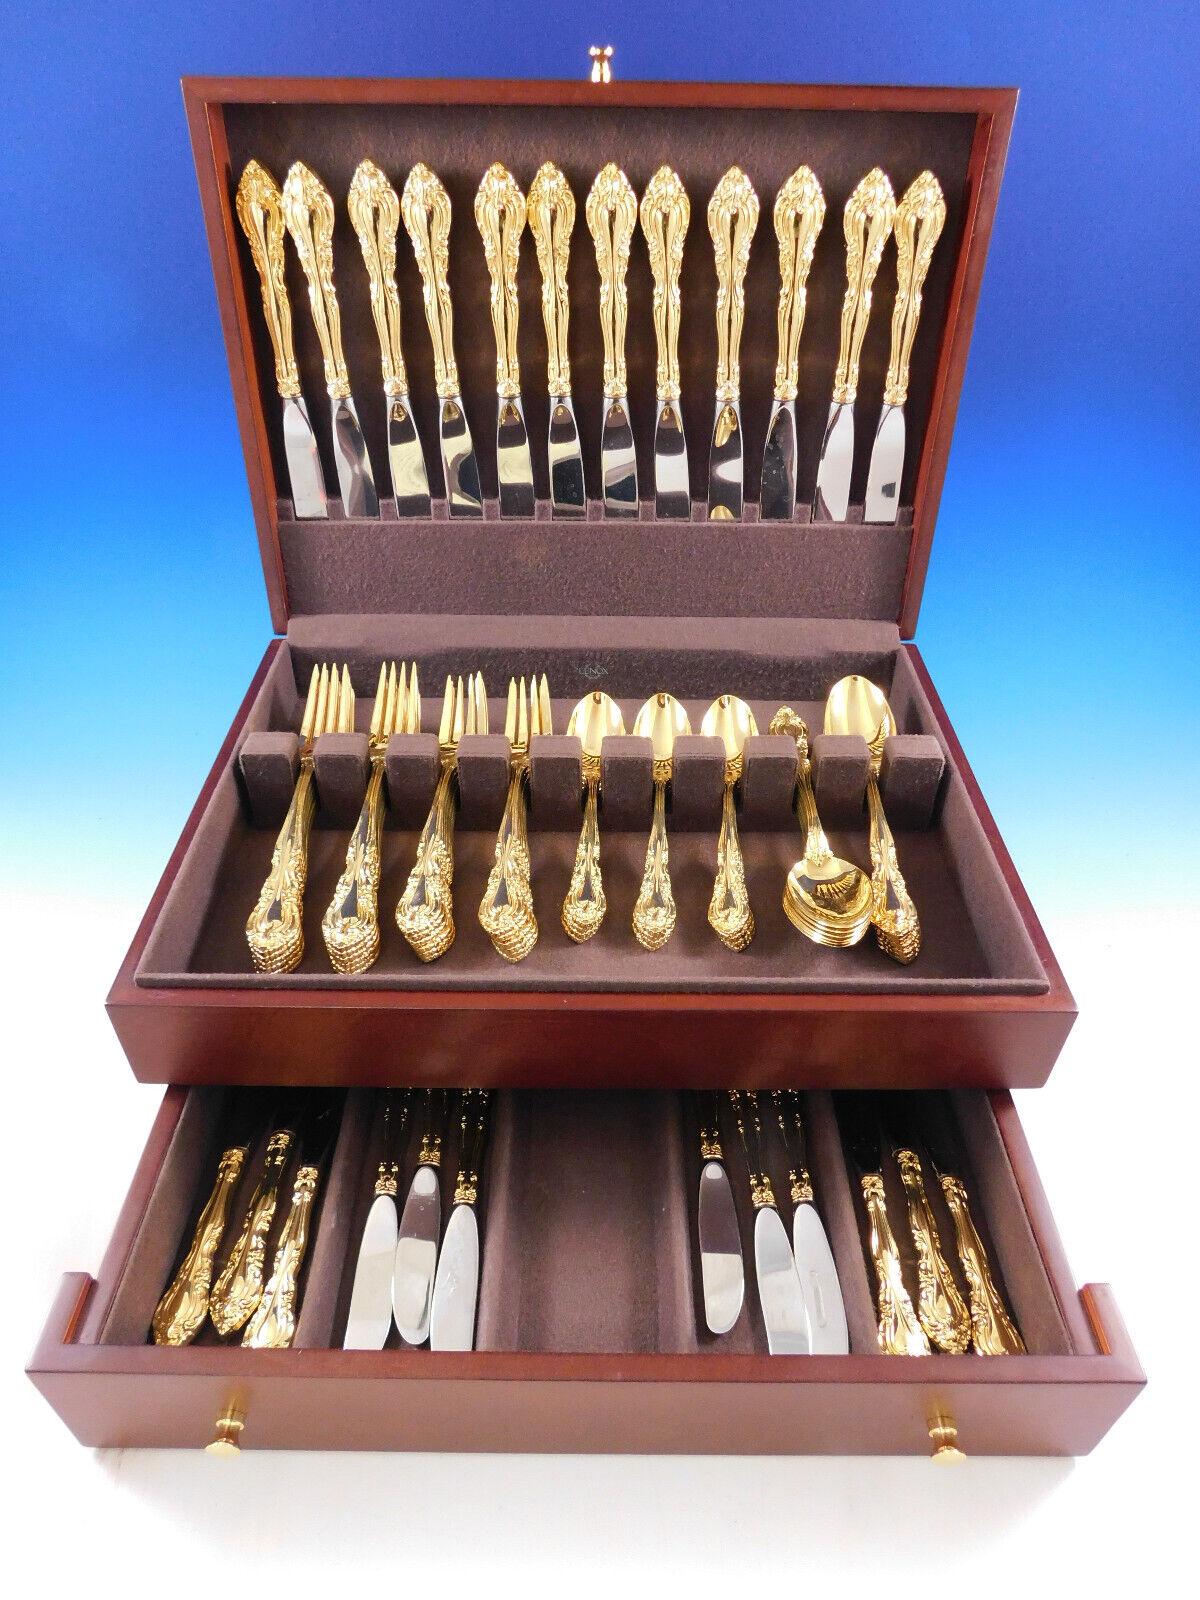 Stunning Vivaldi by Alvin sterling silver vermeil (completely gold-washed) flatware set - 72 pieces. This set includes:



12 Knives, 9 1/4